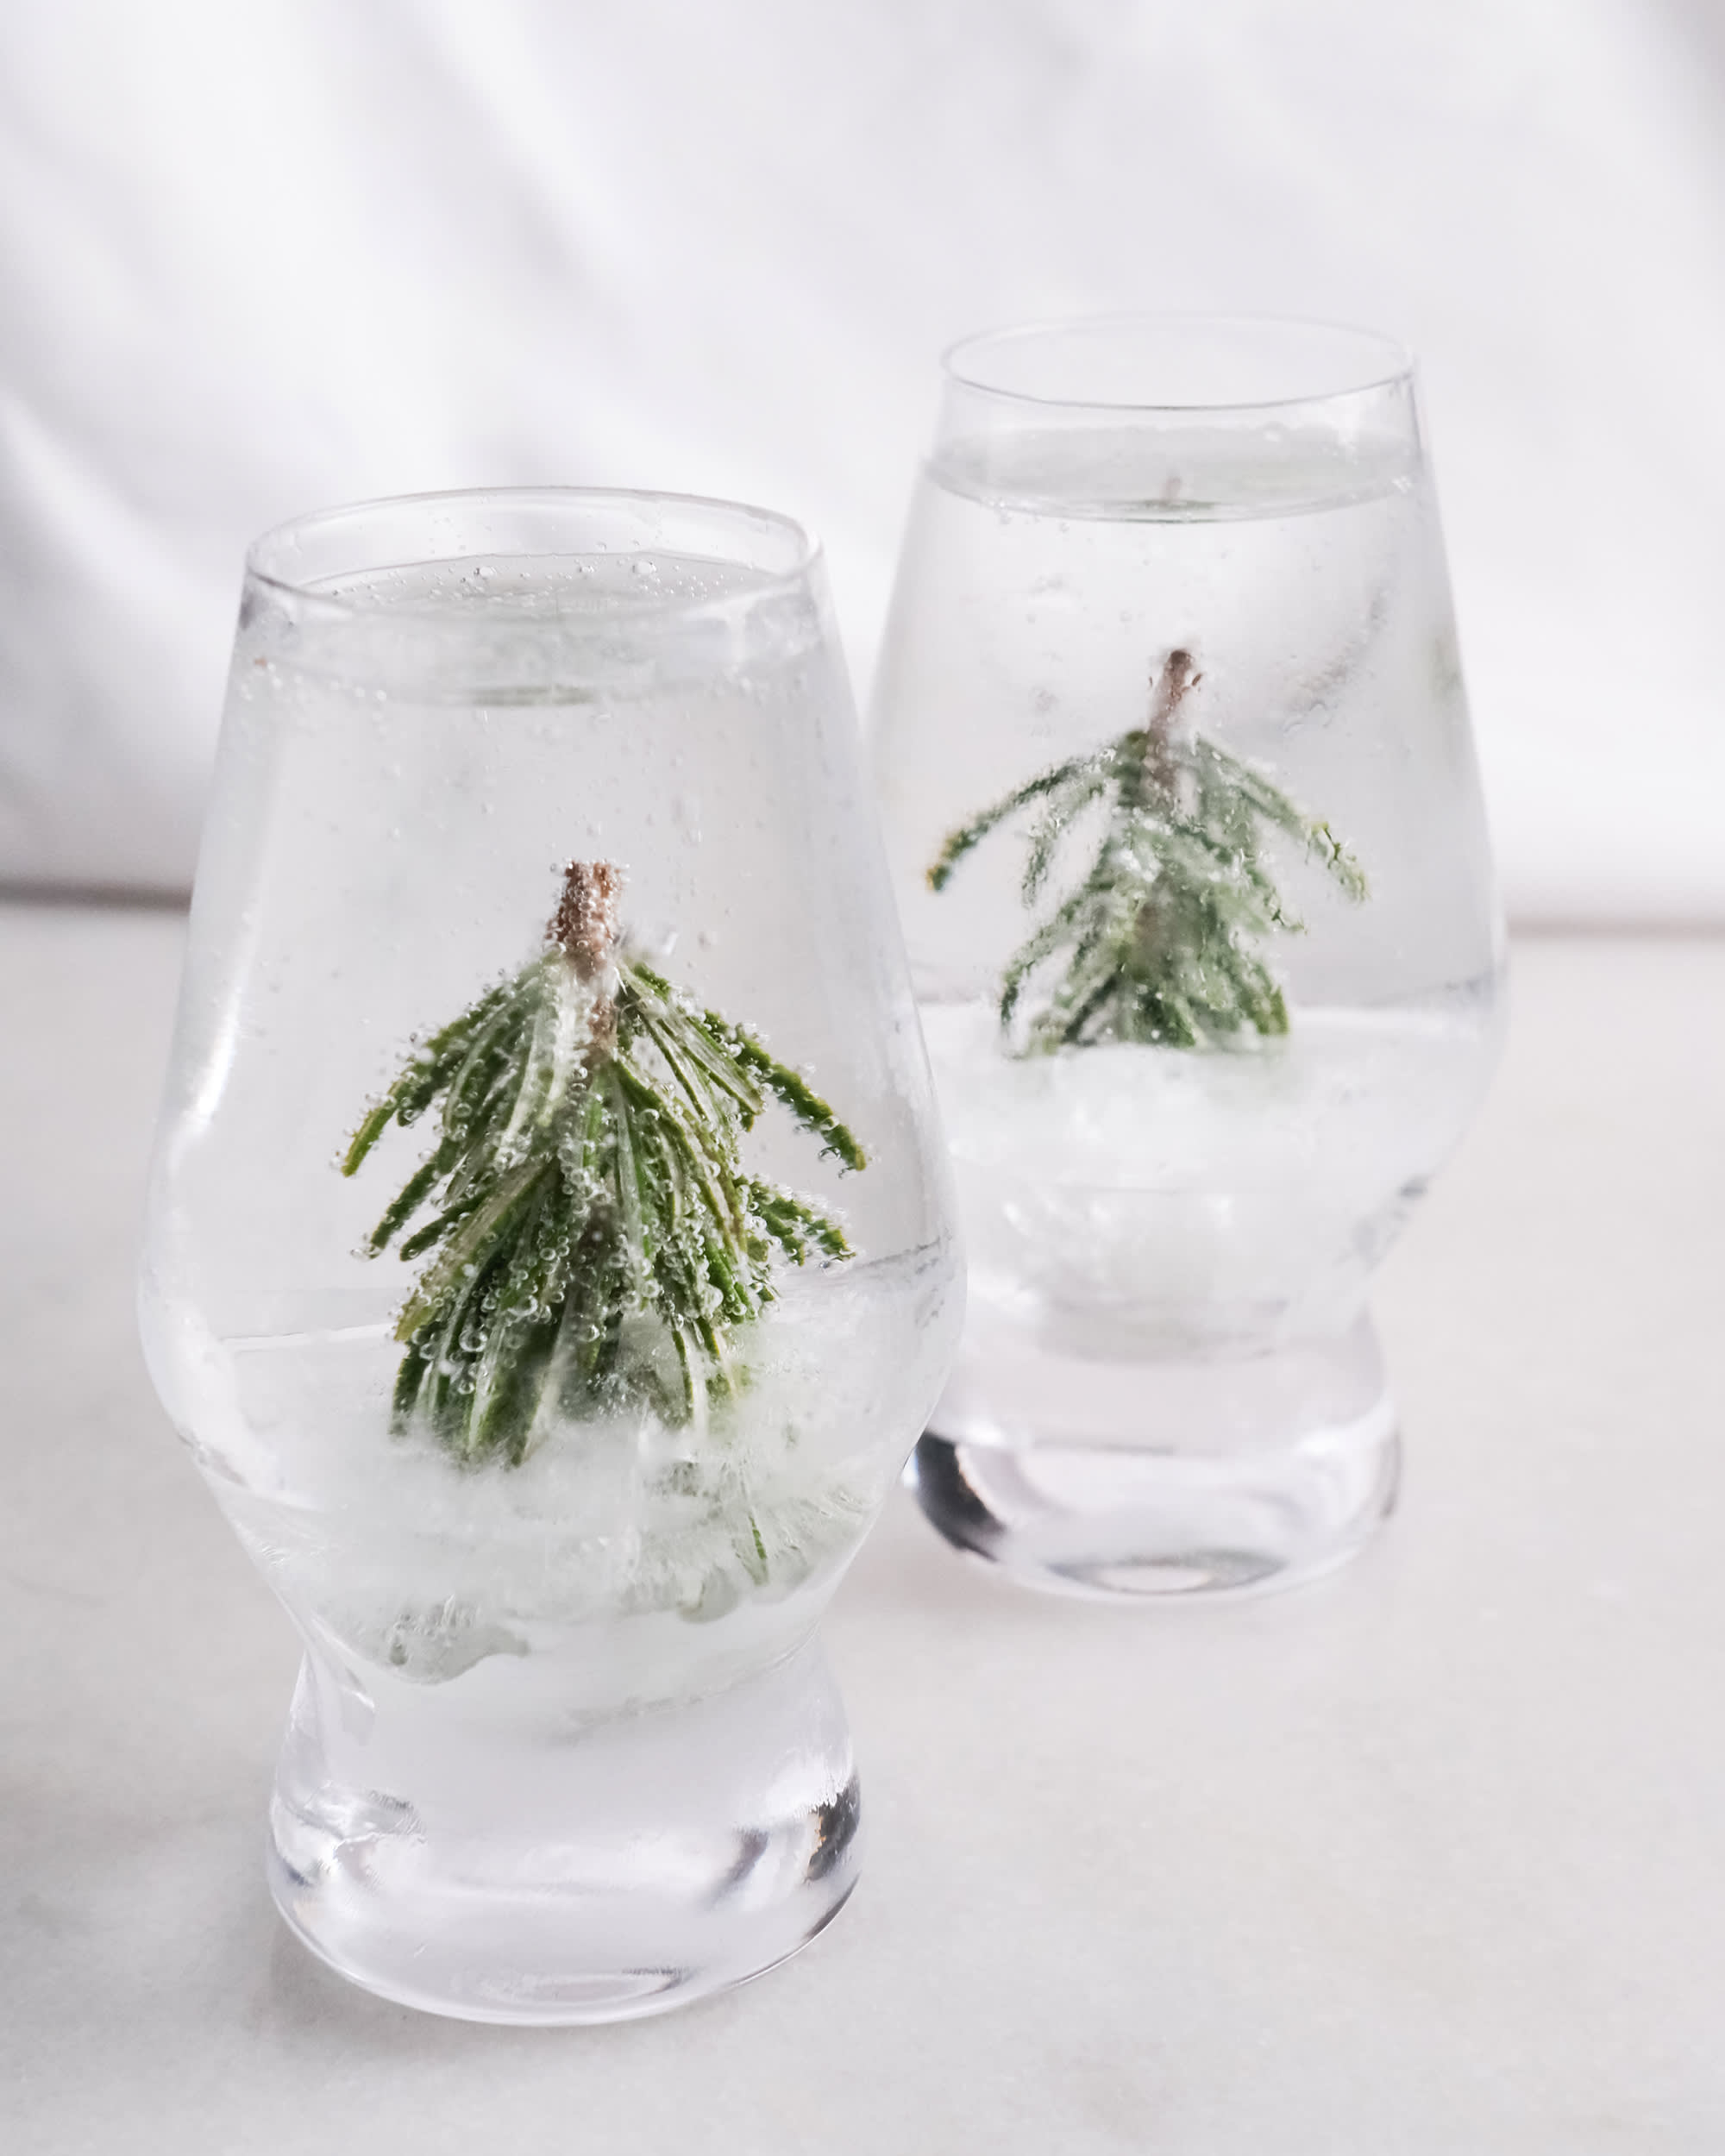 Who's making the VIRAL SNOW GLOBE COCKTAIL?!? I saw this last year and, Snow Globe Tumblers